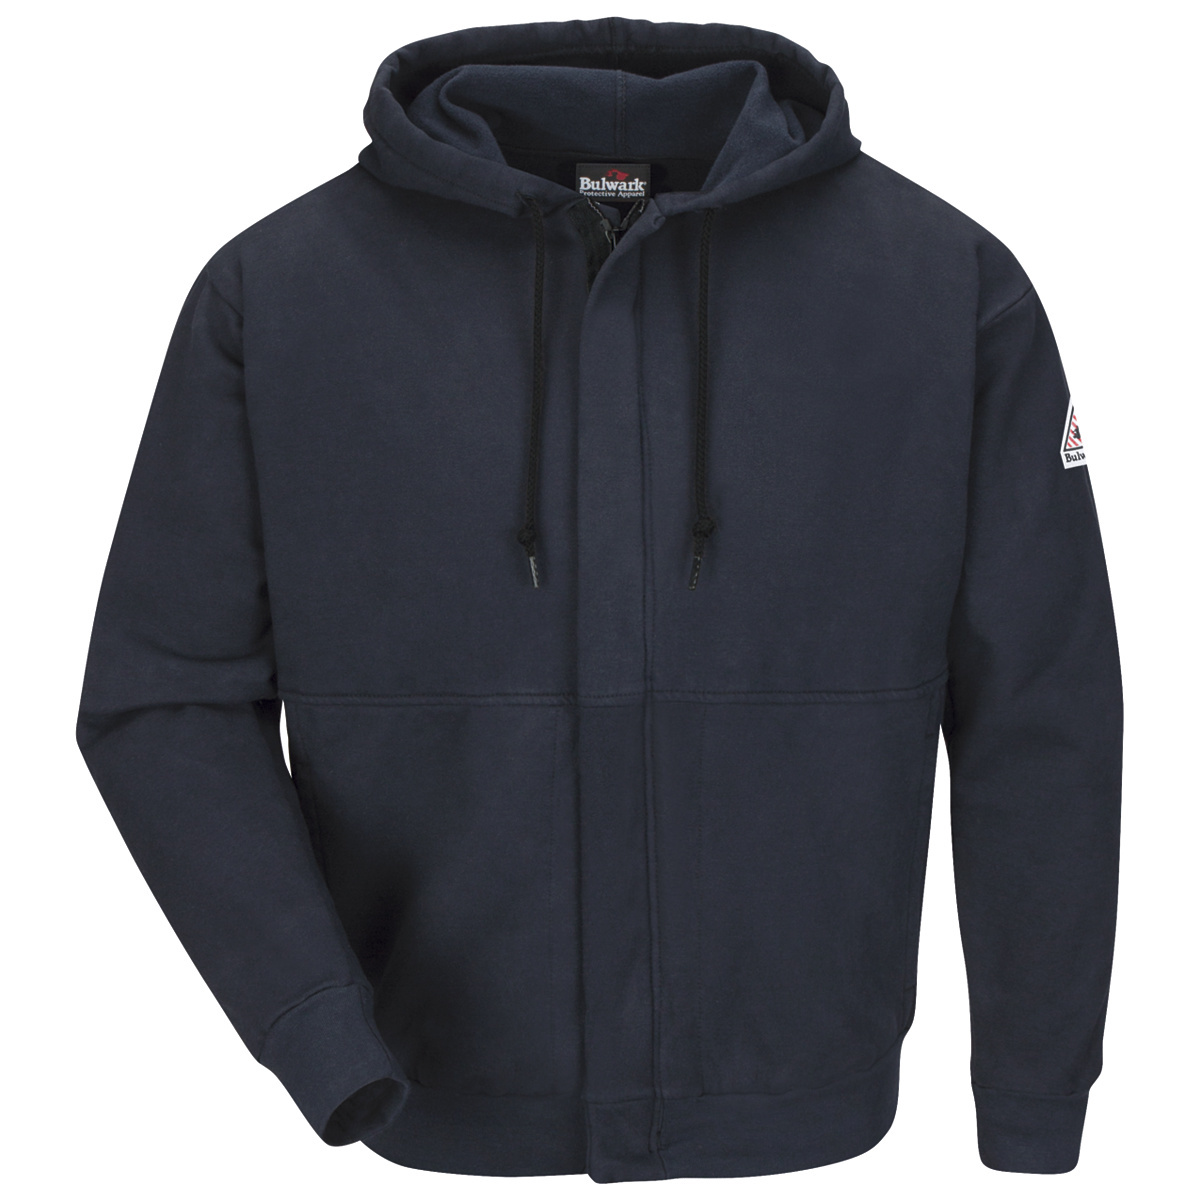 Bulwark® X-Large Tall Navy Blue Cotton/Spandex Brushed Fleece Flame Resistant Hooded Sweatshirt With Zipper Front Closure